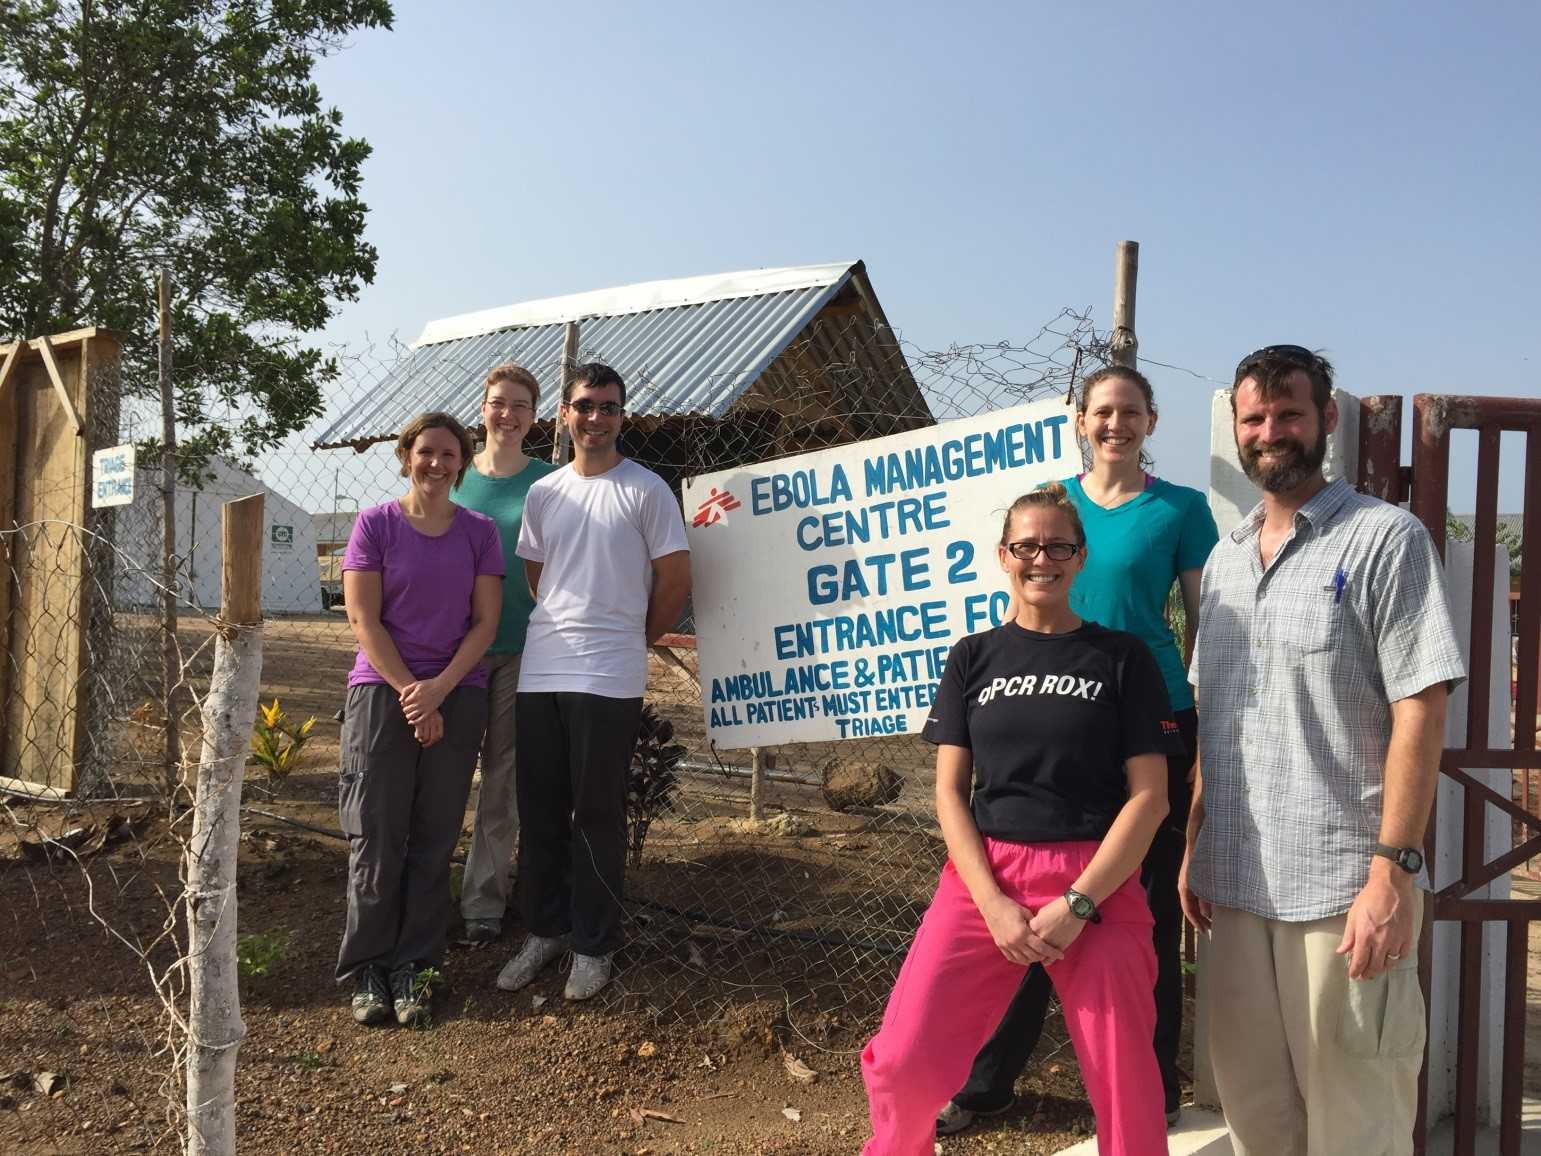 	Members of the Bo lab (Team 12) standing in front of the entrance to the Médecins Sans Frontières compound, where the lab is located. (Left to right) Janae Stovall, Laura Rose, Marko Zivcec, Lauren Andersen, Shannon Emery, and Brian Bird